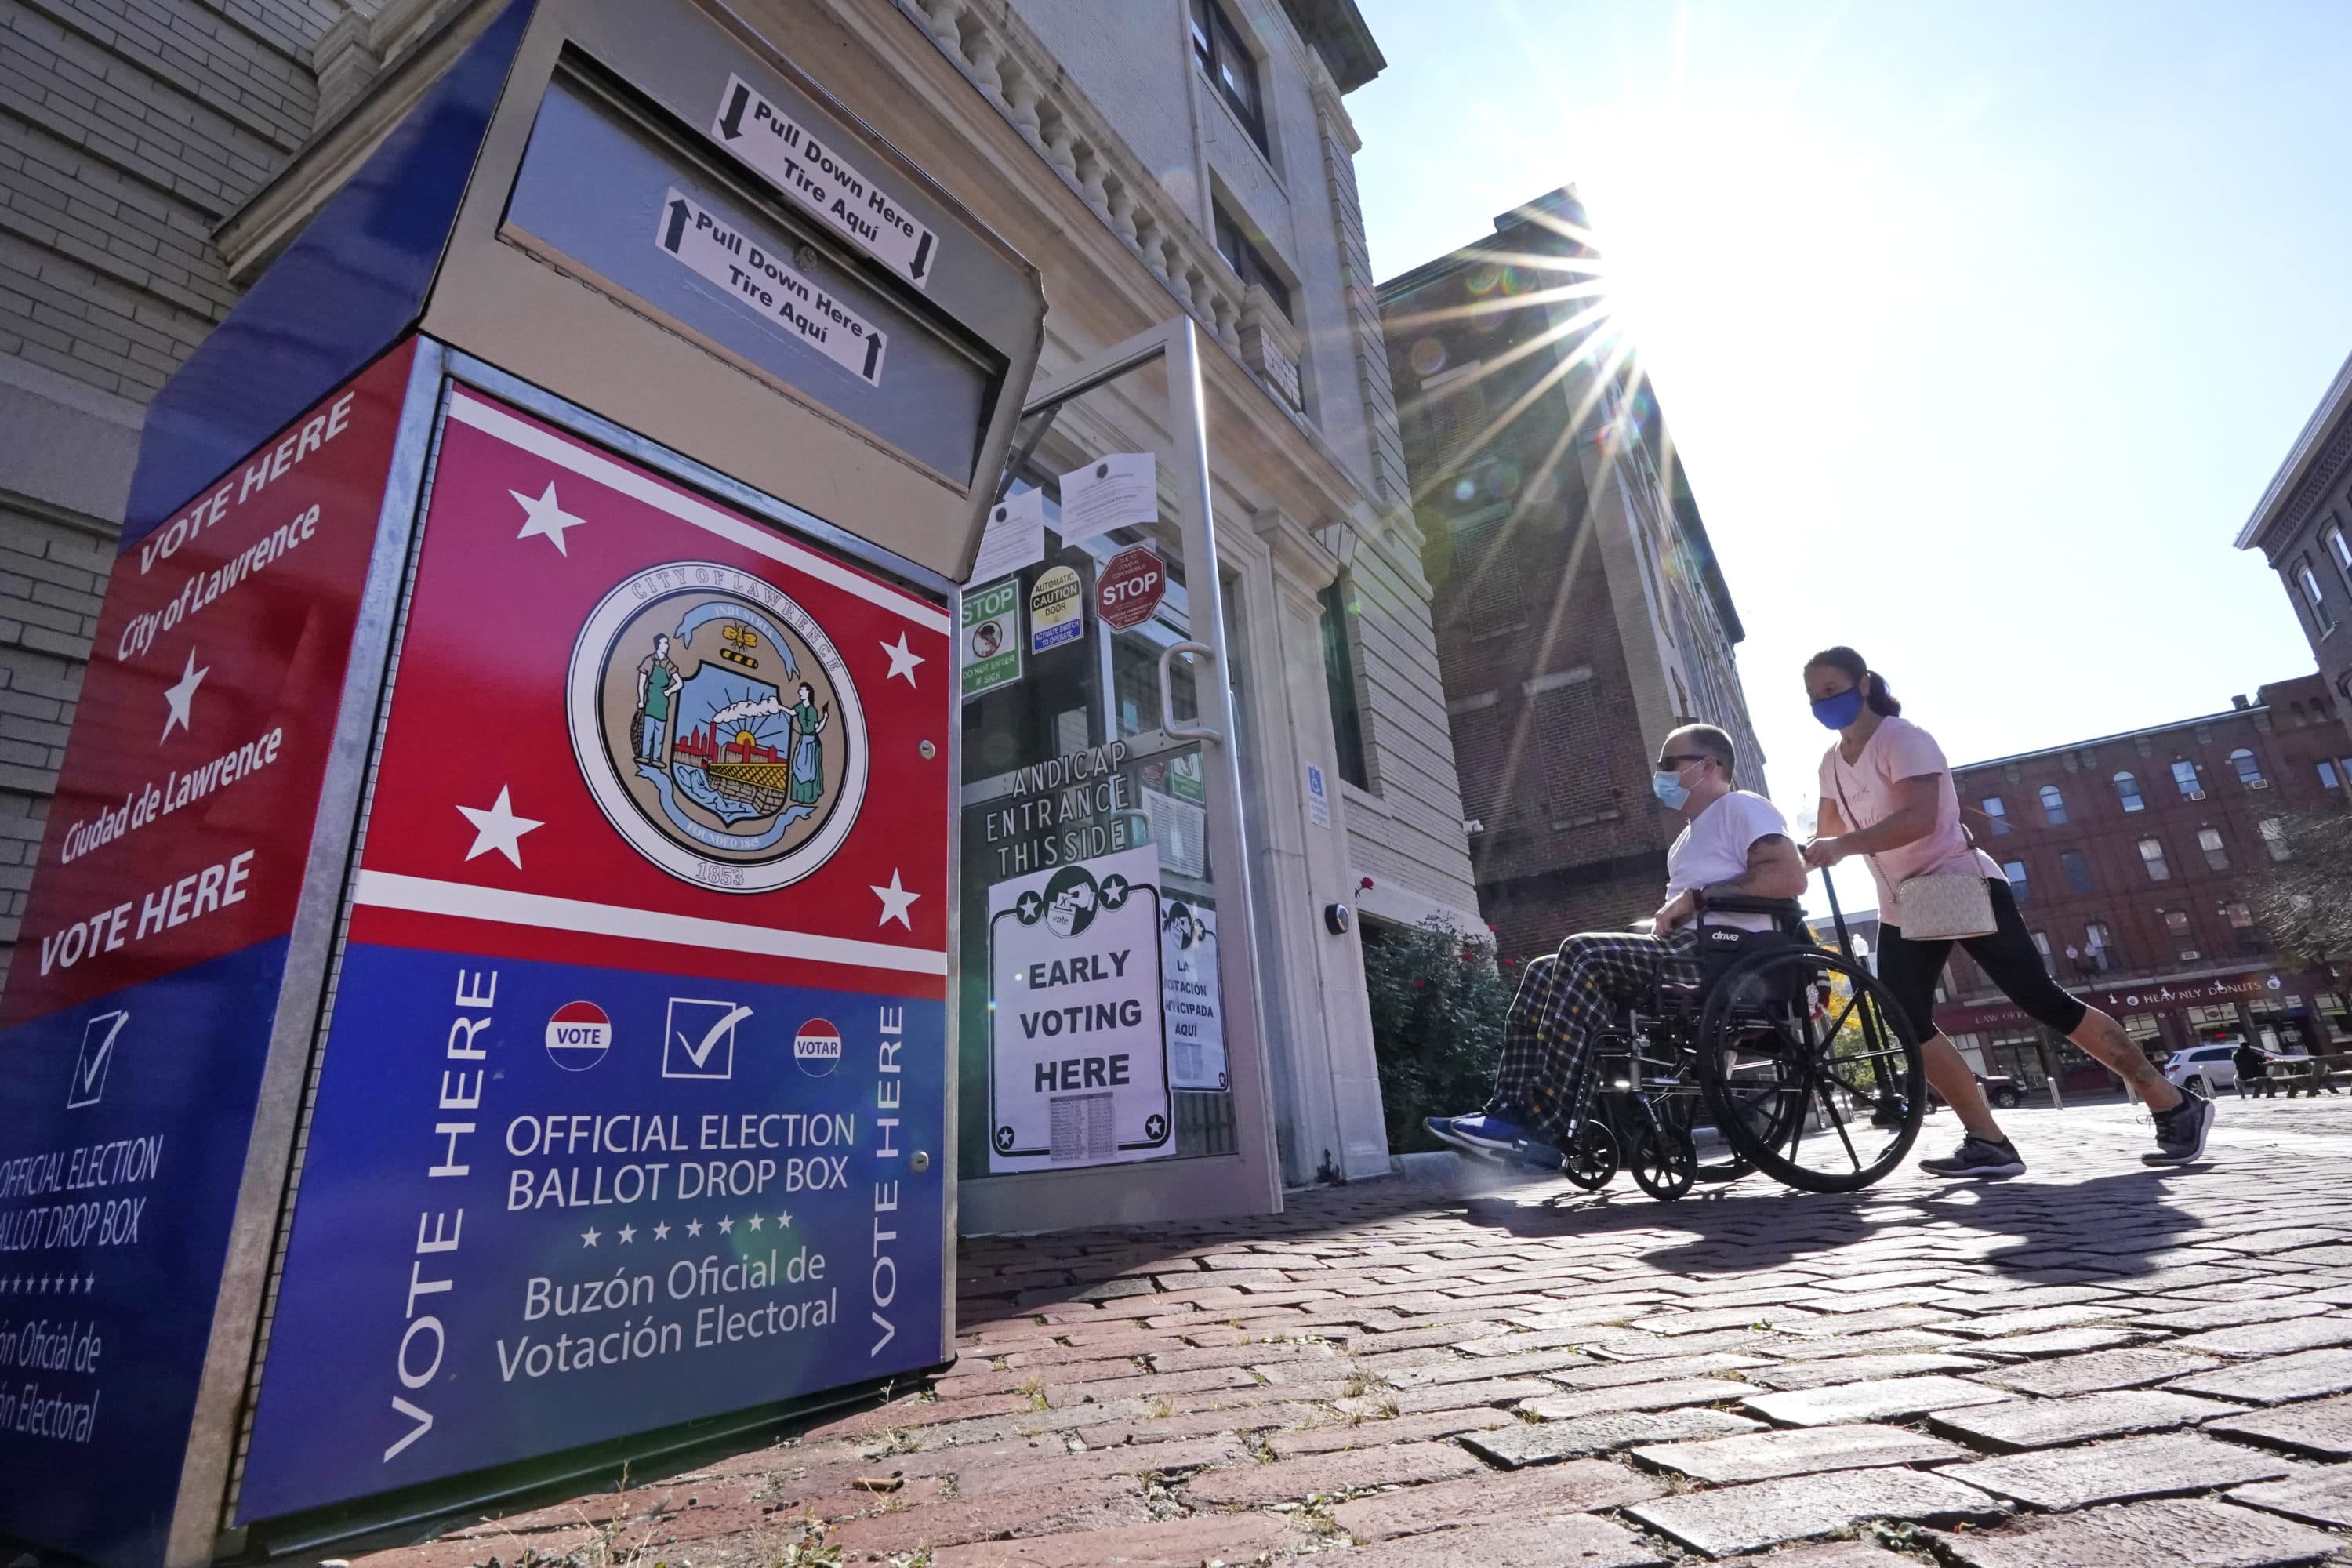 Voters enter Lawrence City Hall during early in-person voting, Oct. 22, 2020, in Lawrence, Mass. (Elise Amendola/AP)